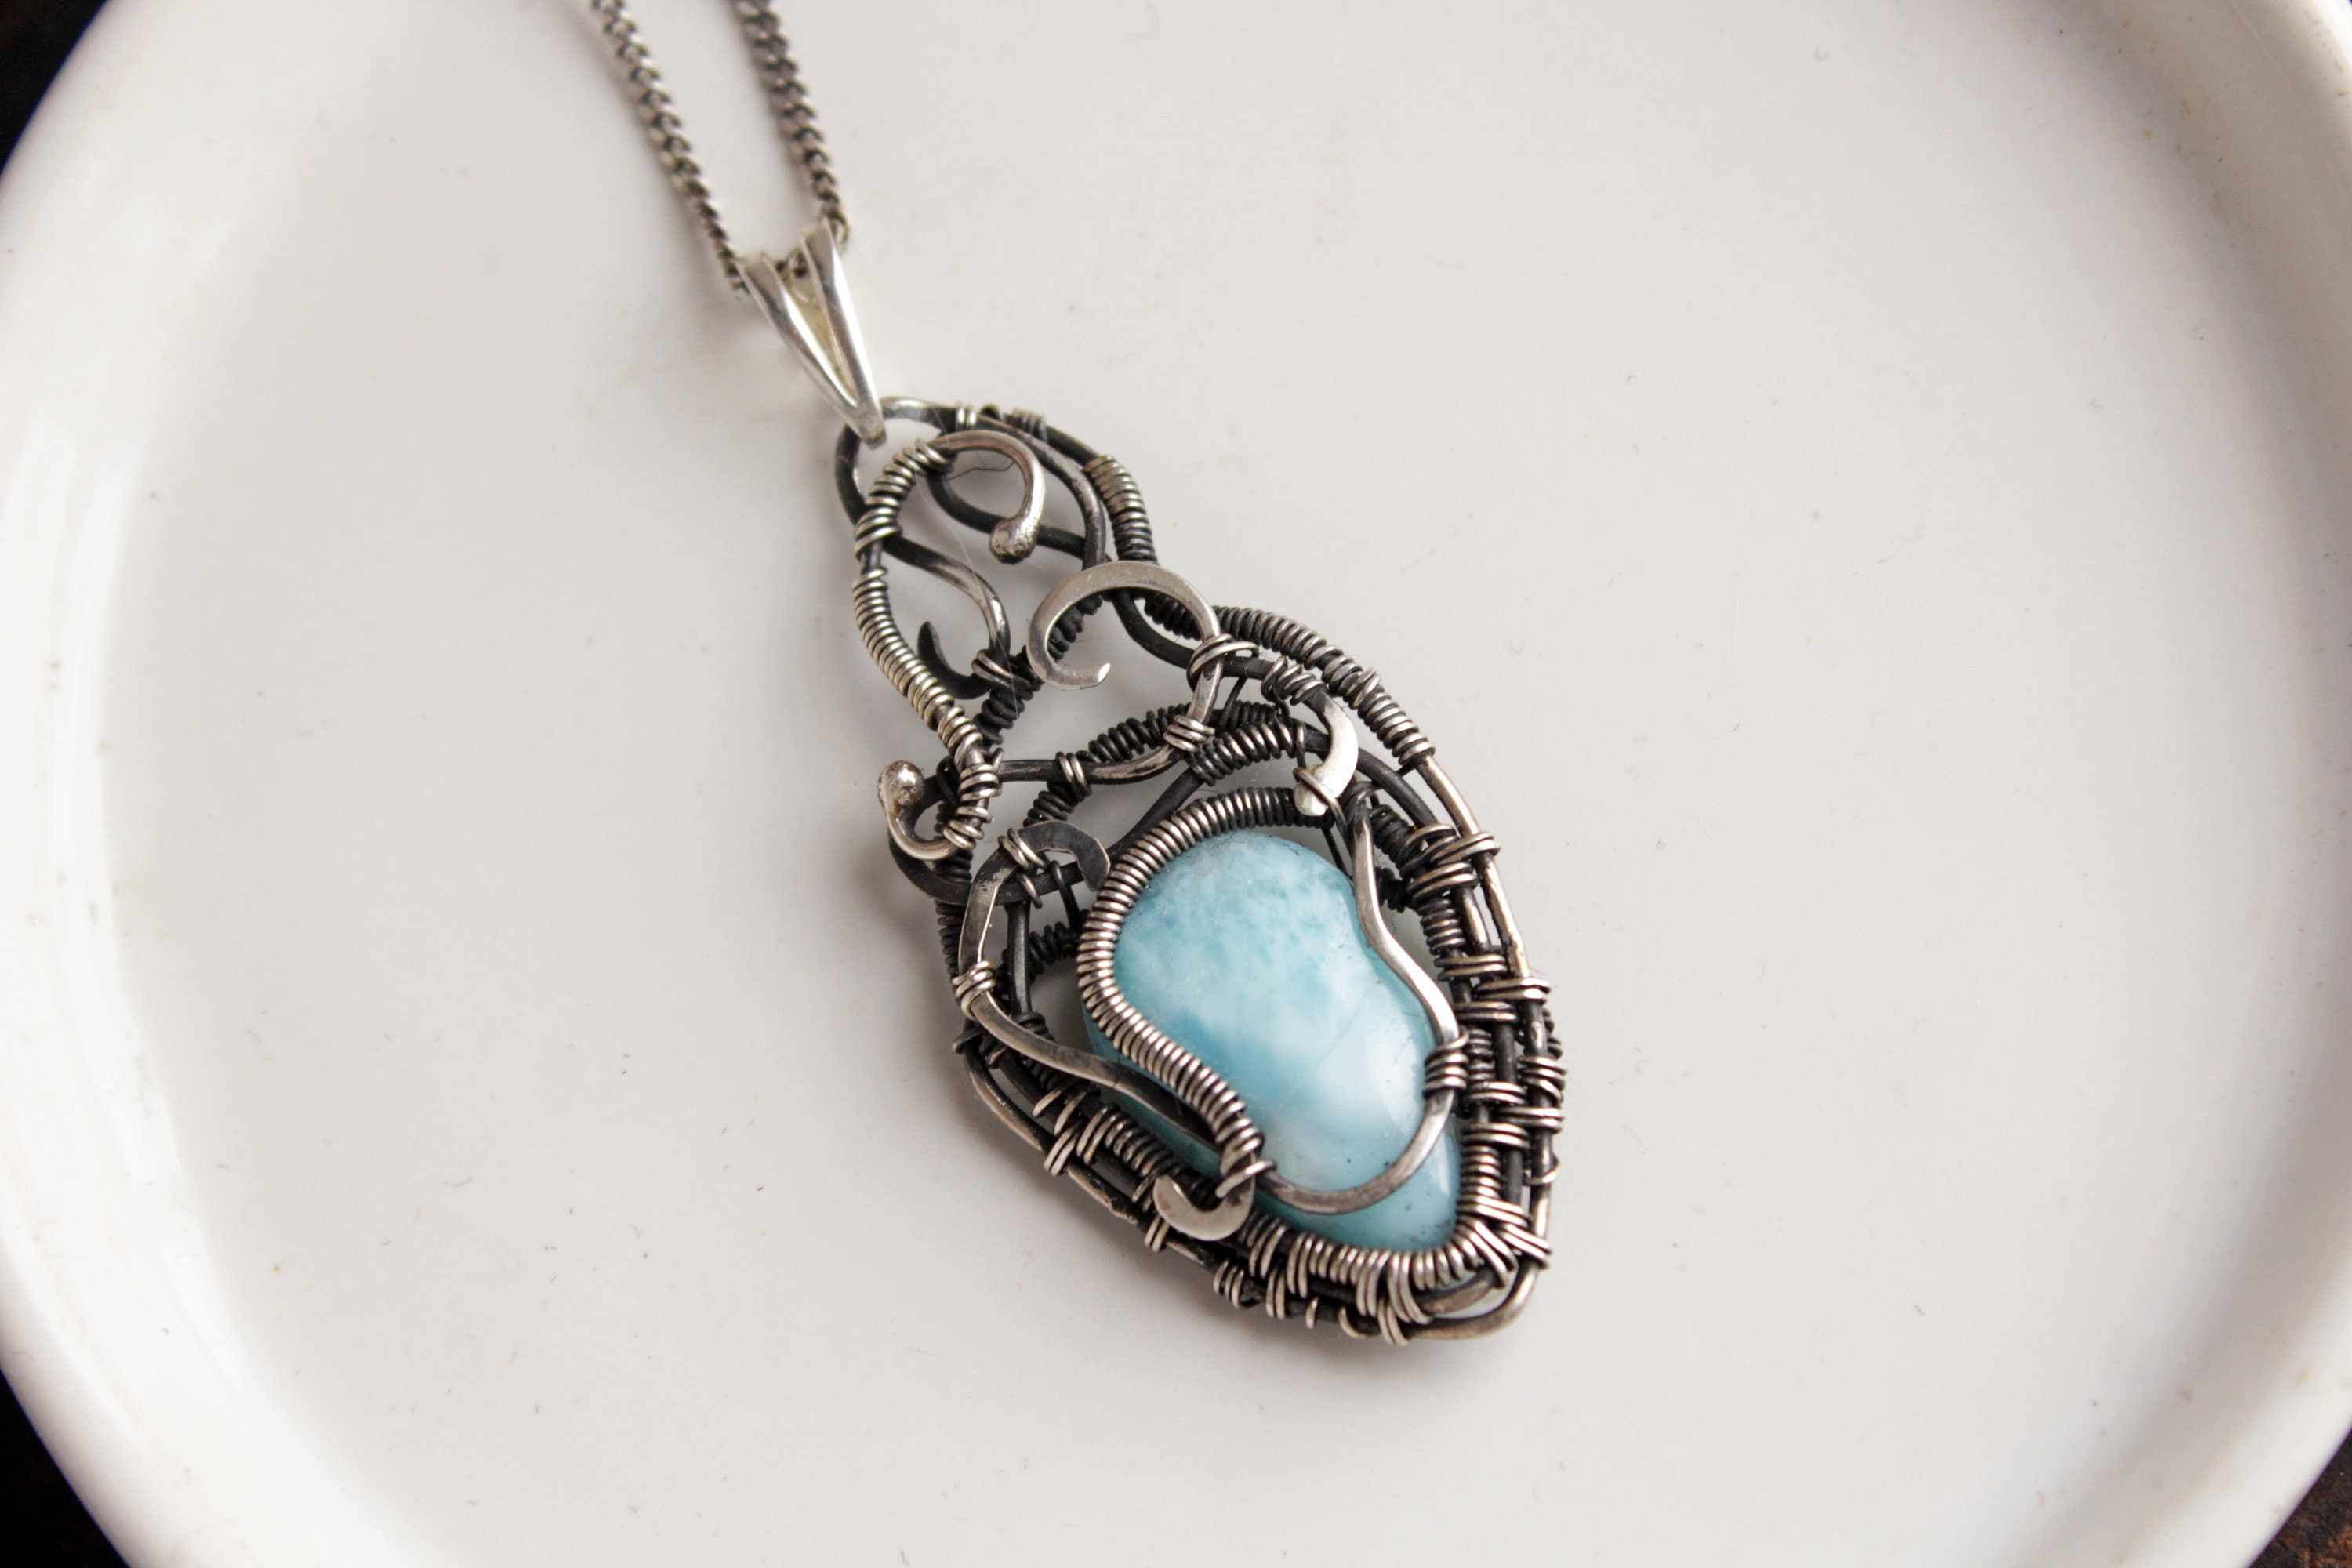 Silver Larimar Pendant Blue Stone Wire Wrapped Necklace Etsy